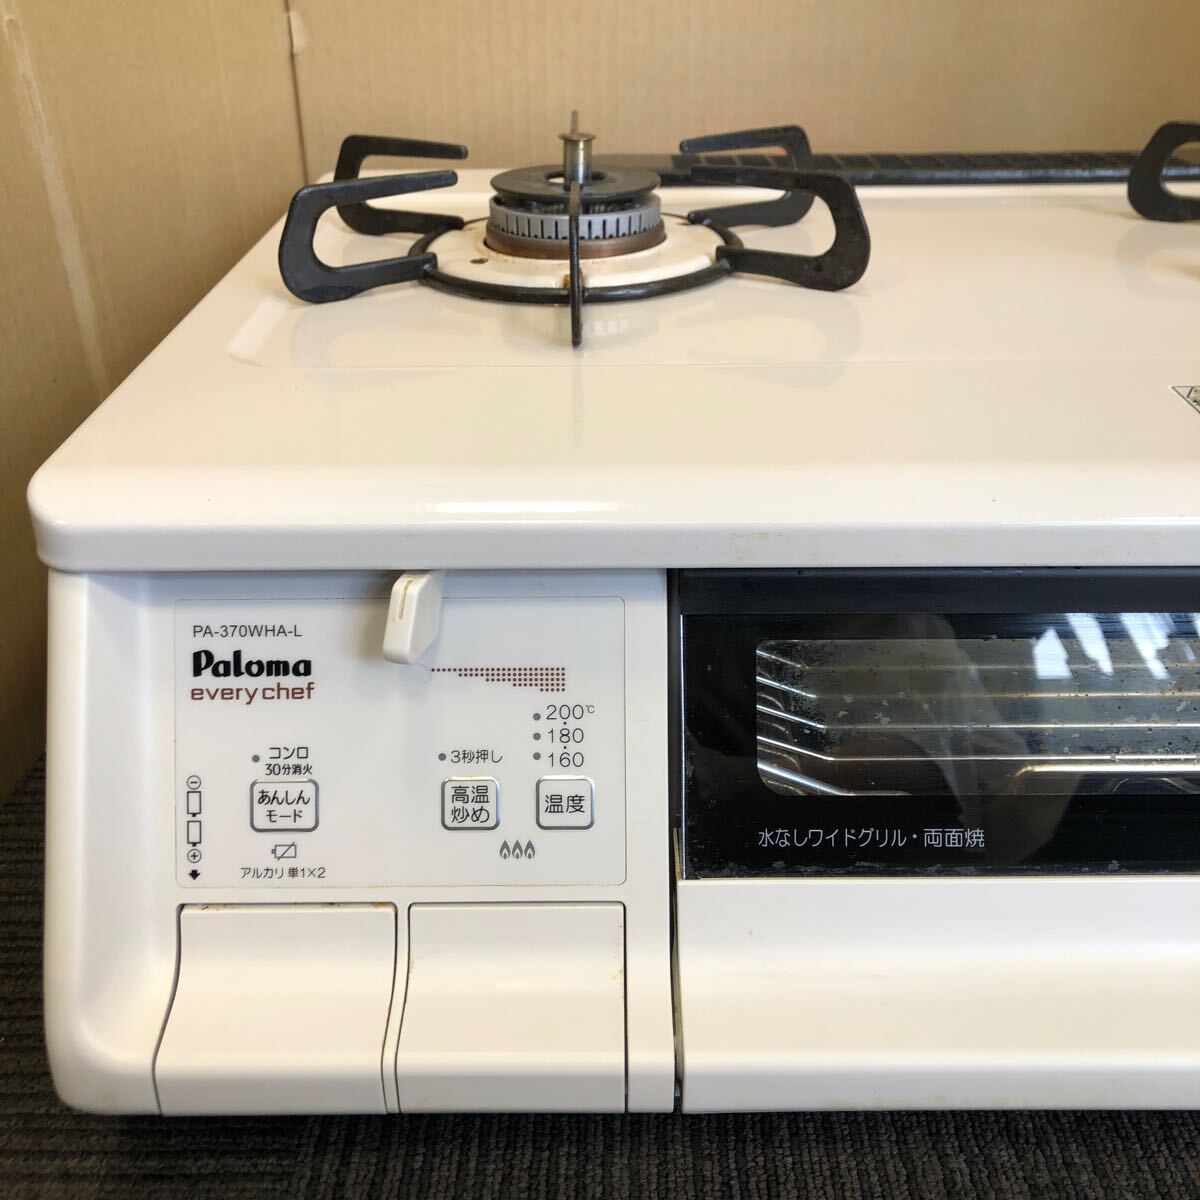 [ present condition goods ]5-16 Palomaparoma gas-stove LP gas PA-370WHA-L natural white 2. grill attaching left a little over heating power gas portable cooking stove 